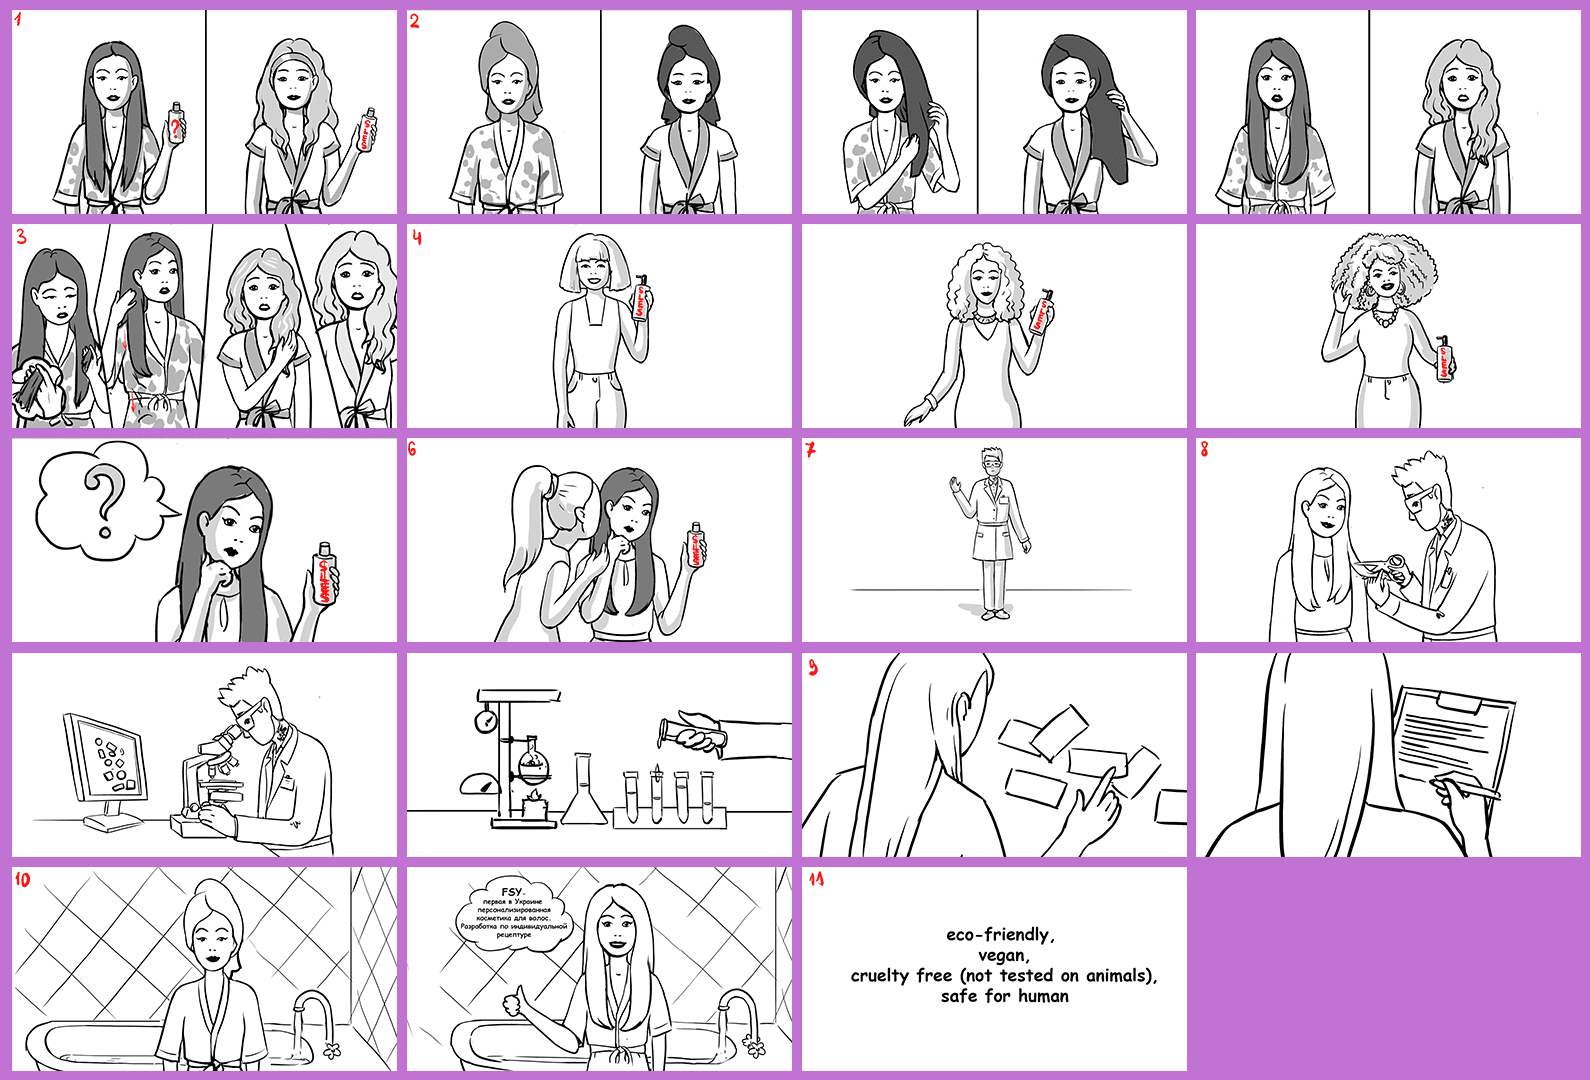 Storyboard for the video "For Special You Promo Video"